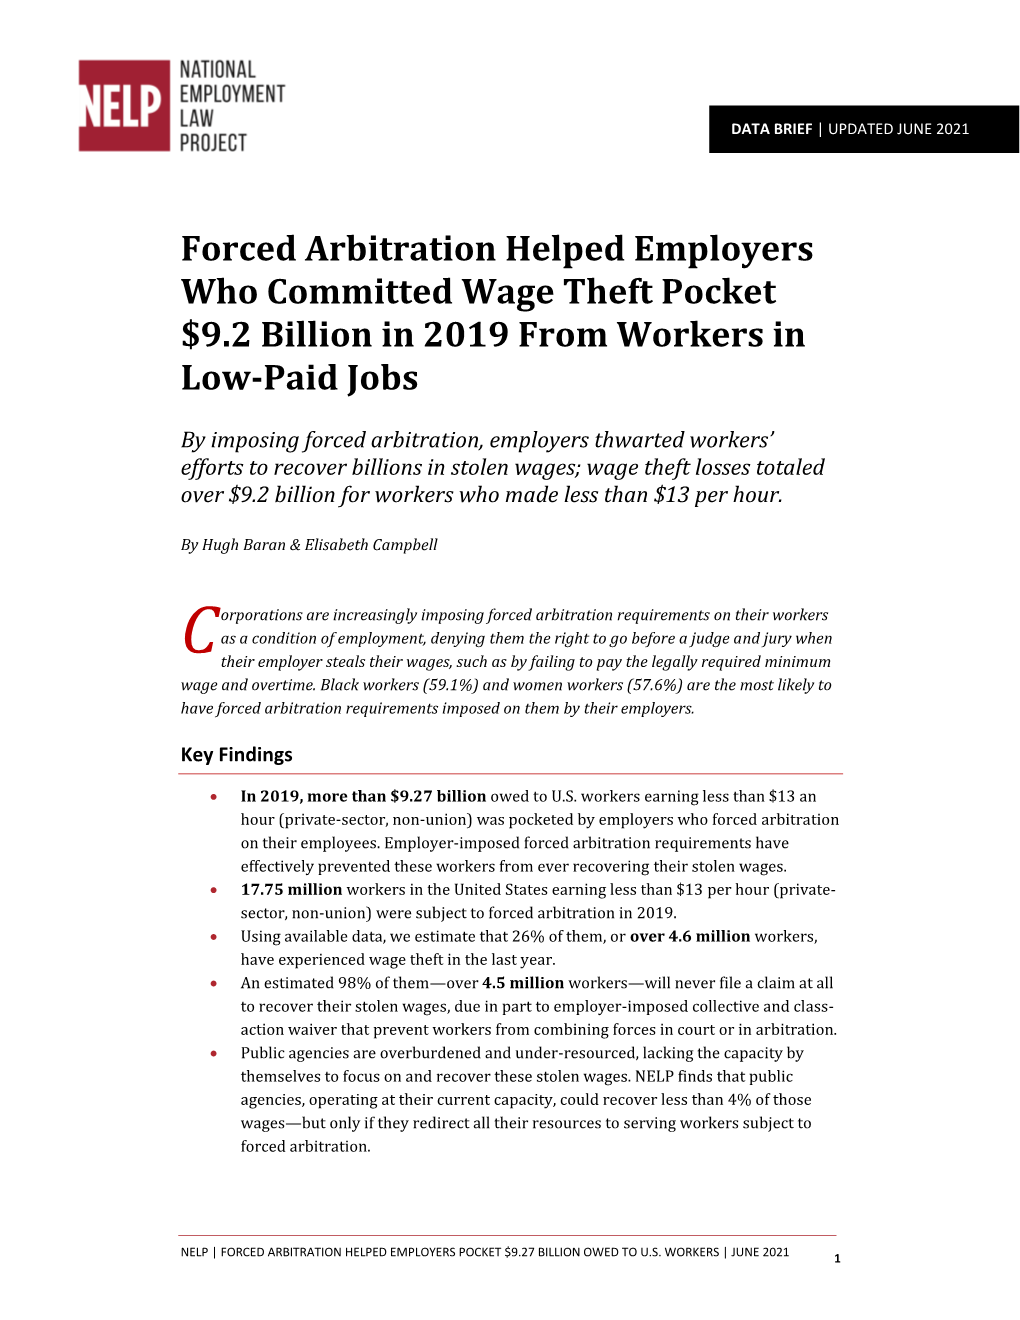 Forced Arbitration Helped Employers Who Committed Wage Theft Pocket $9.2 Billion in 2019 from Workers in Low-Paid Jobs